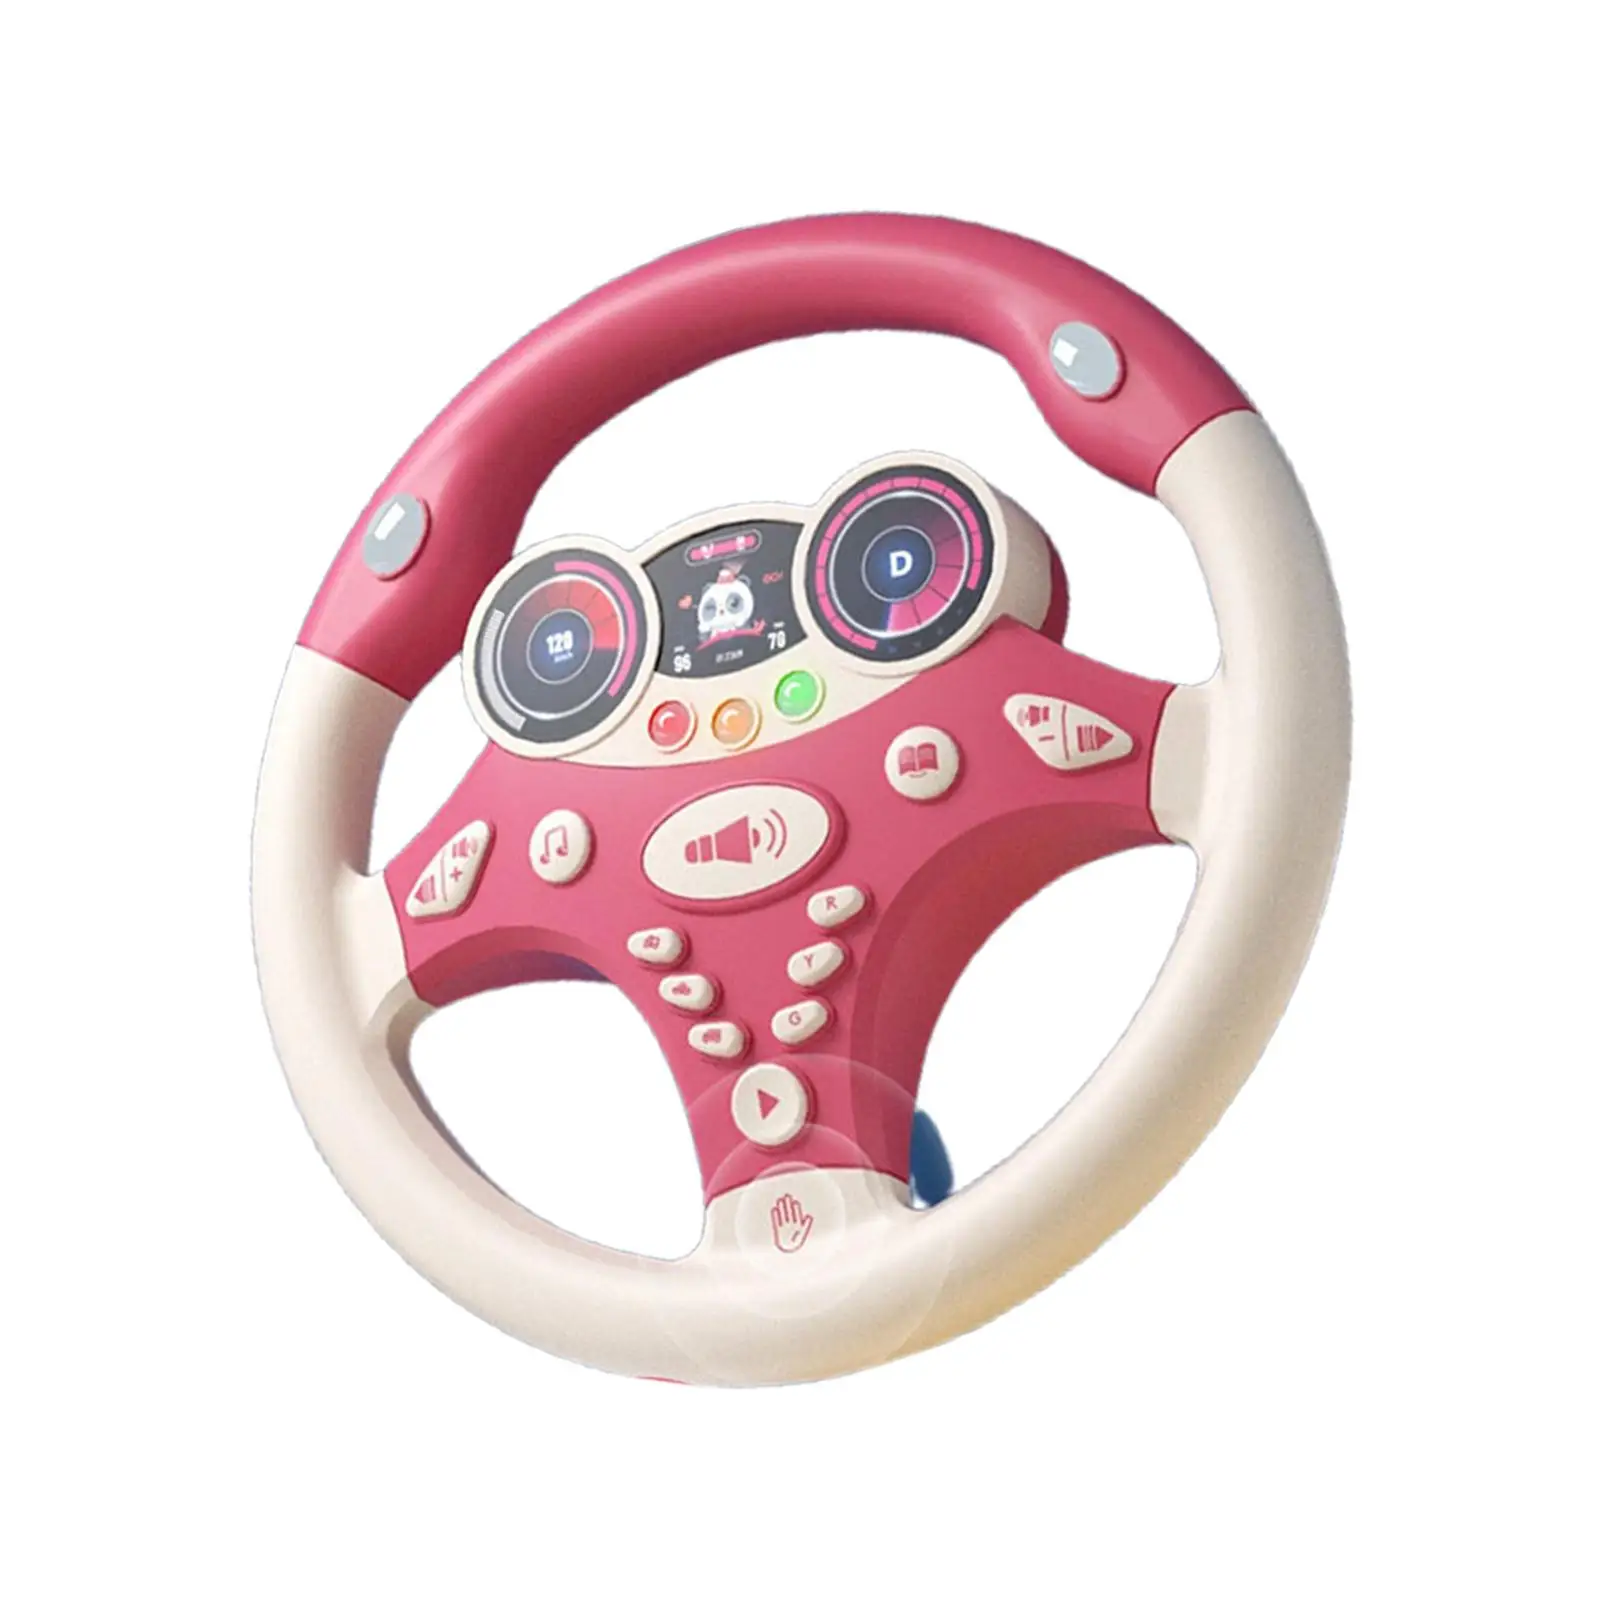 Round Electric Steering Wheel Toy Simulated Driving Steering Wheel Kids Electric Wheel Toy for Boys Children Kids Holiday Gifts